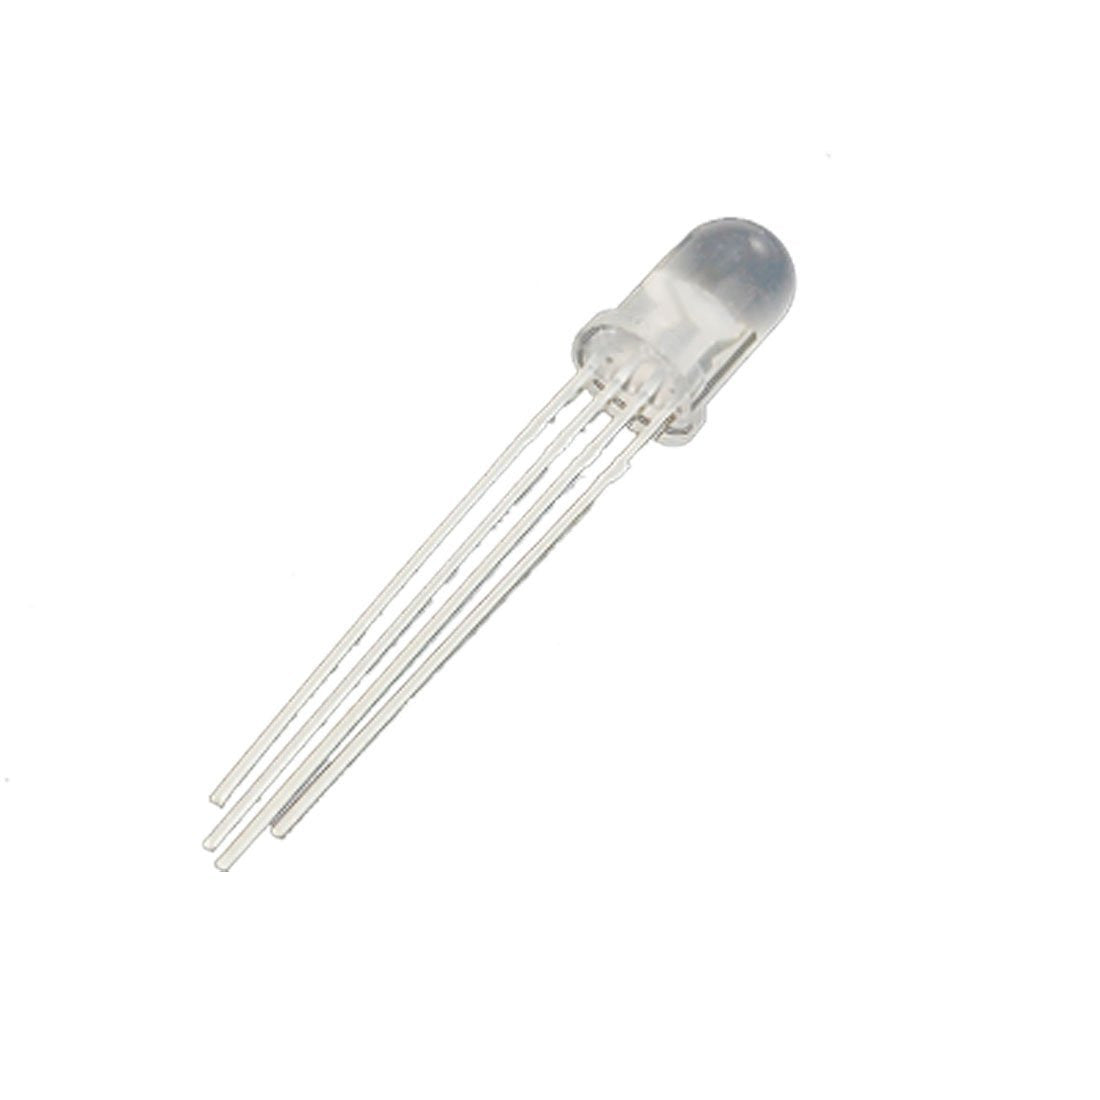 microtivity IL612 5mm Diffused RGB Controllable LED, Common Anode (Pack of 12)